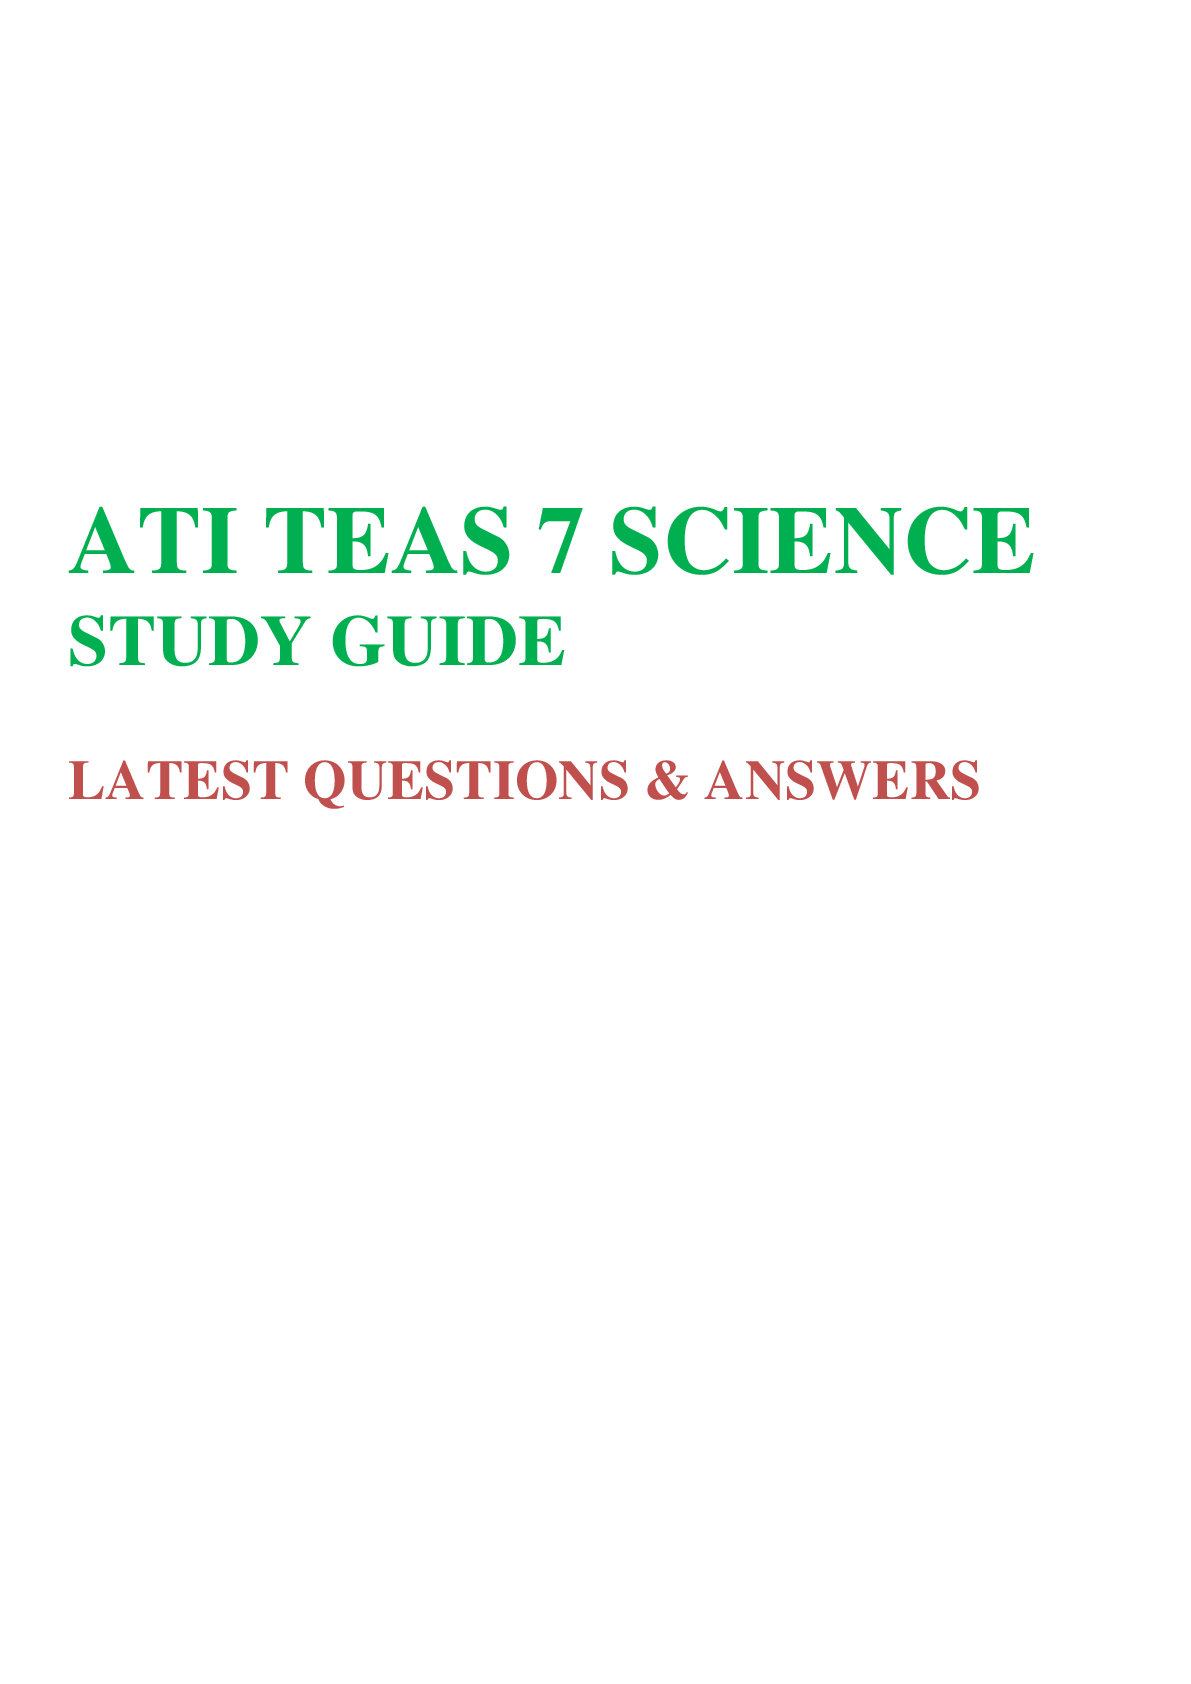 ATI TEAS 7 SCIENCE STUDY GUIDE 2022 LATEST QUESTIONS & ANSWERS